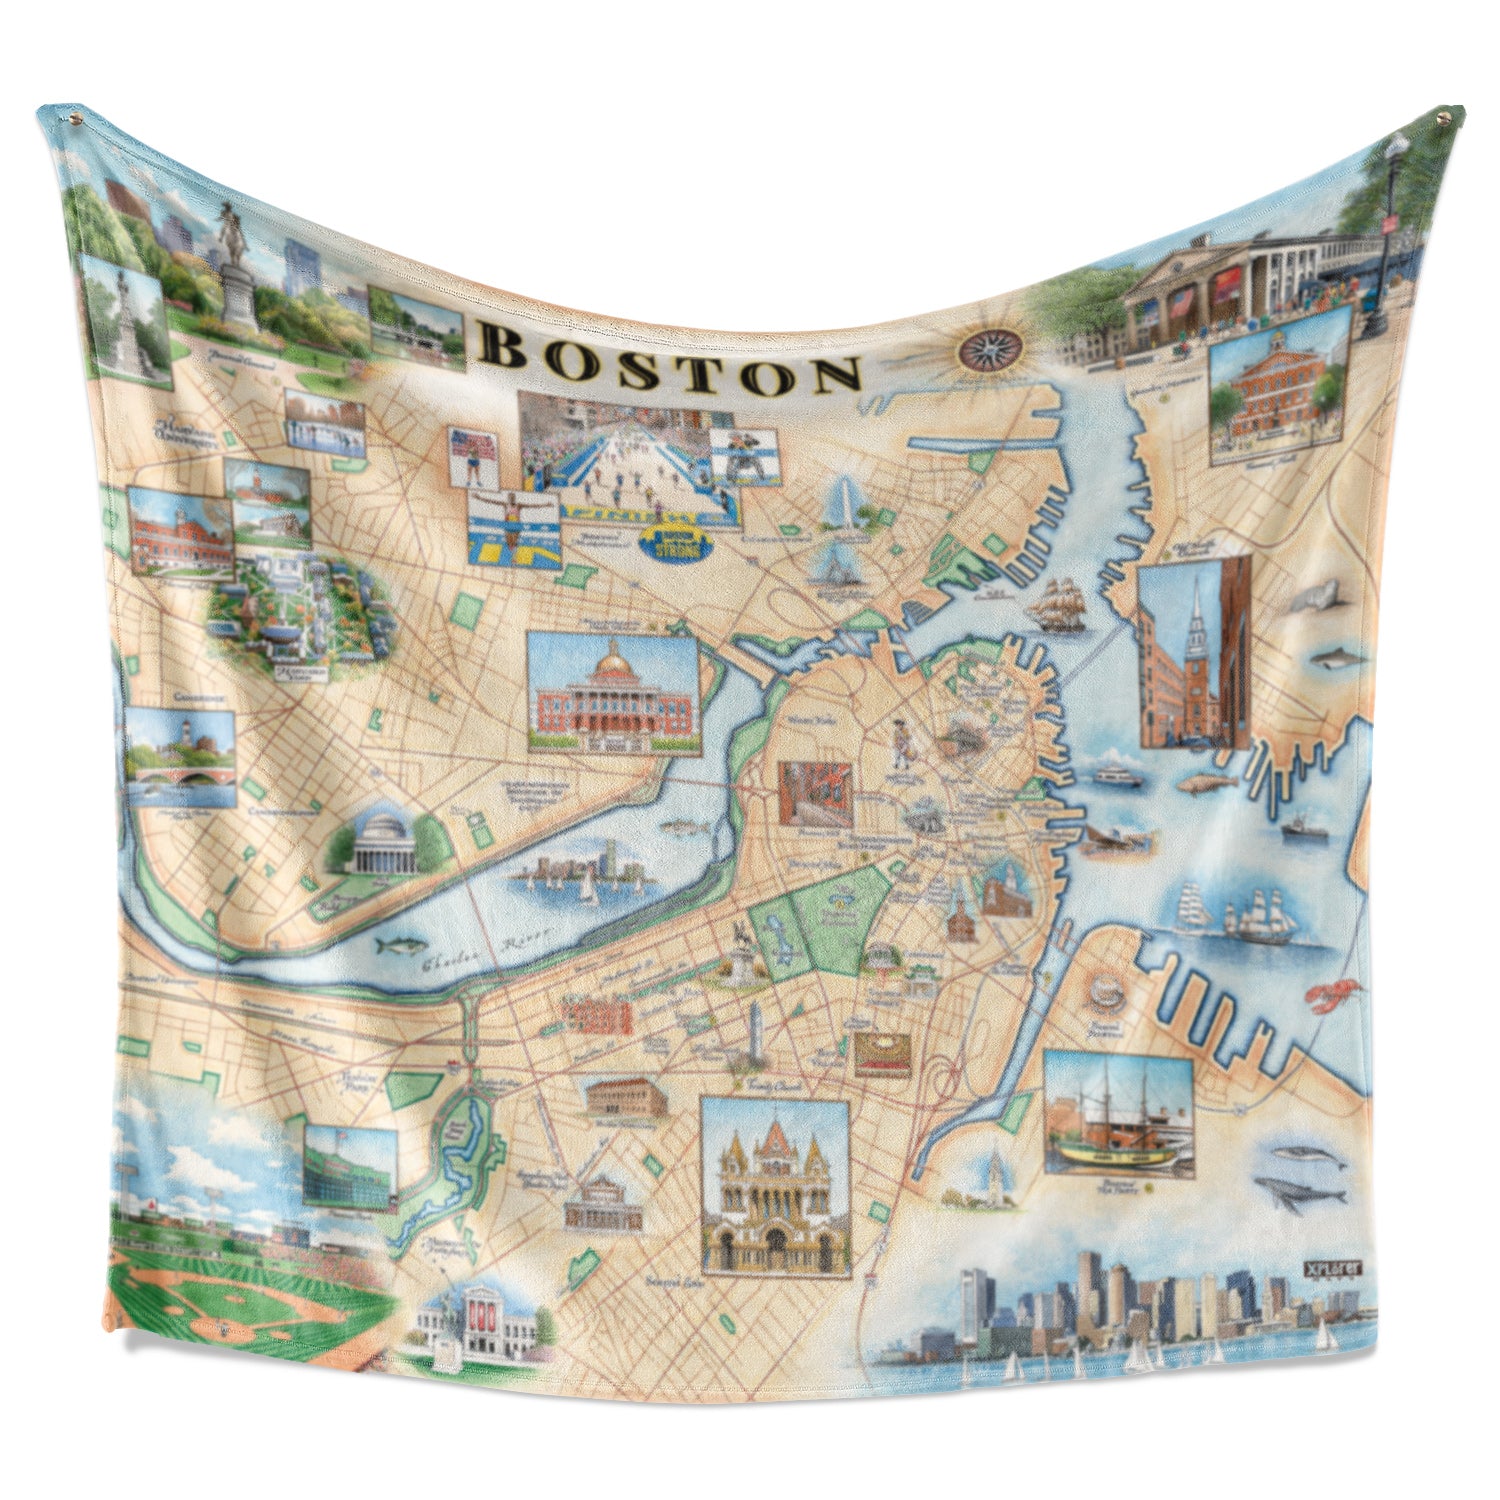 Hanging fleece blanket featuring a map of Boston, Massachusetts. The map features the Boston tea party, the Trinity Church, and Boston Marathon. Measures 50